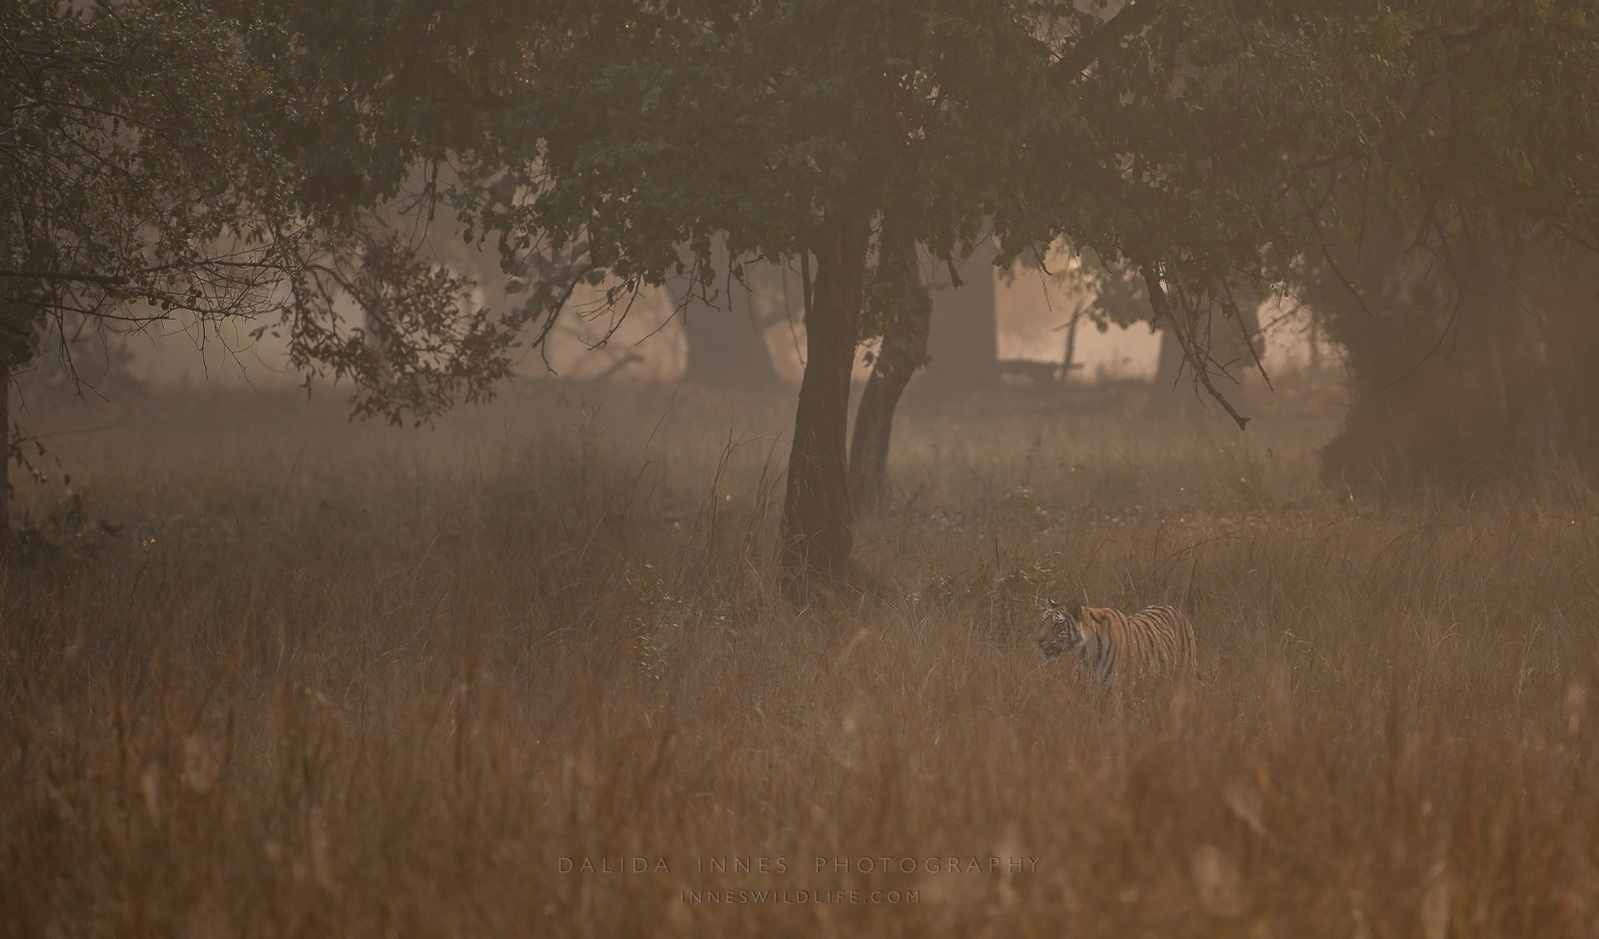 Tiger in the beautiful landscape of Bandhavgarh National Park, India 